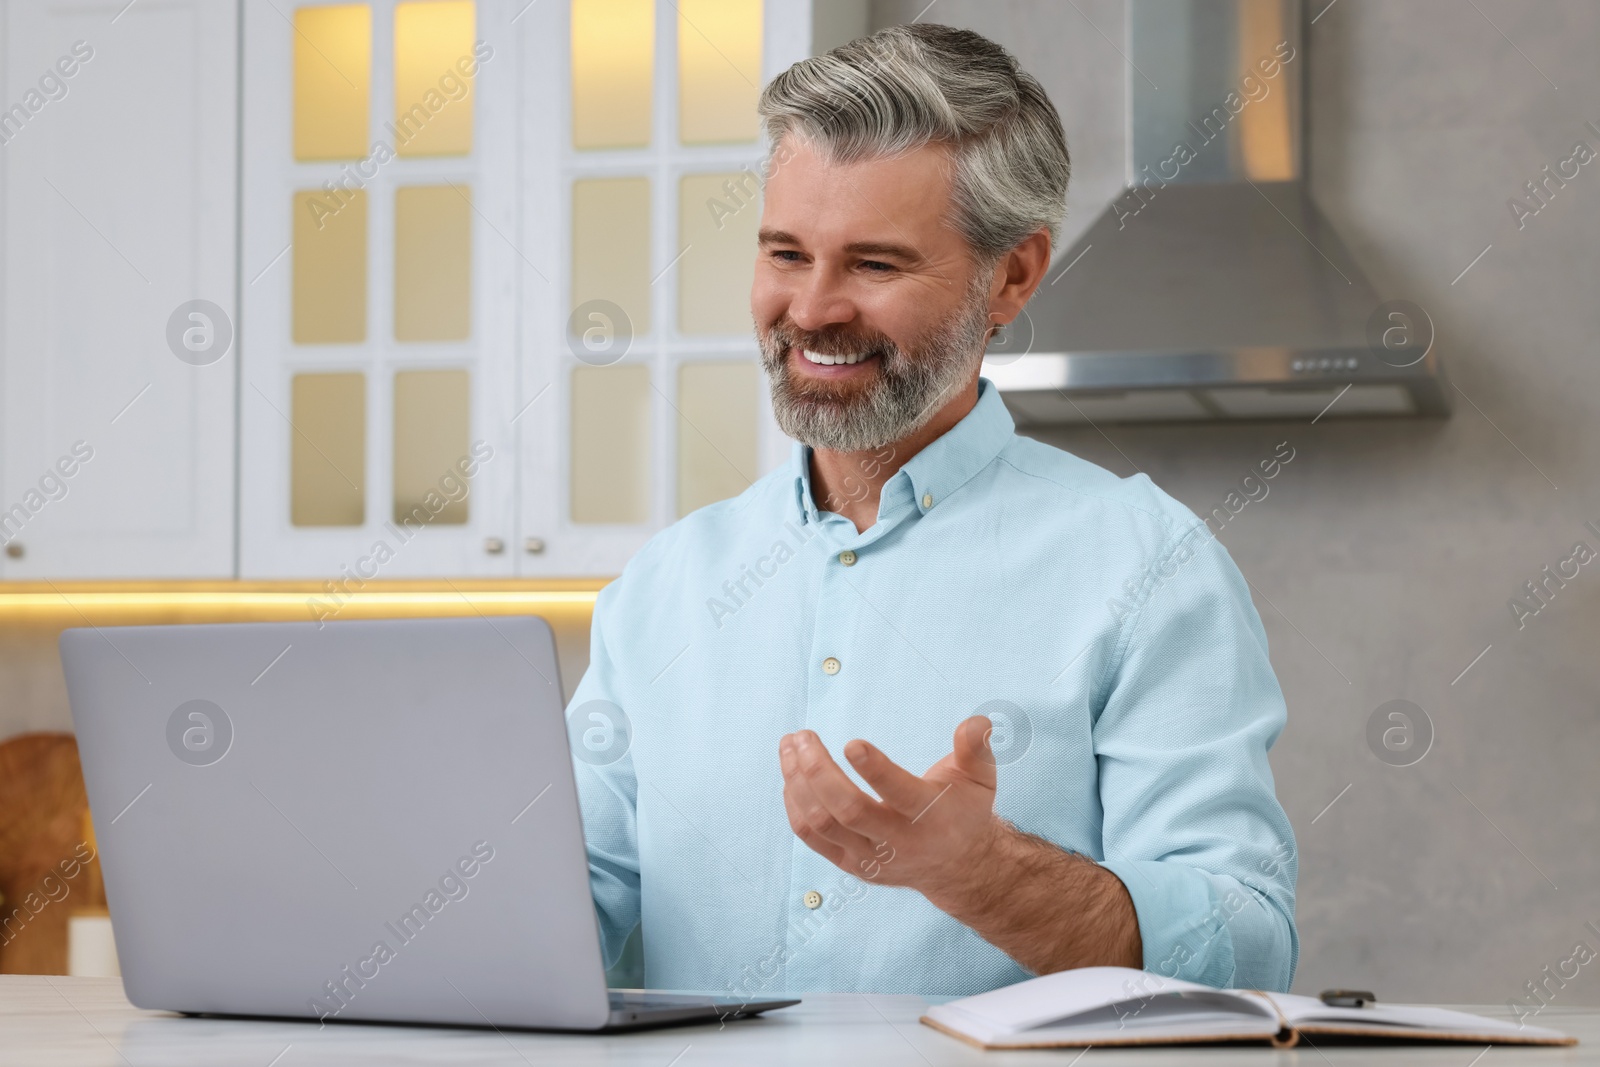 Photo of Man waving hello during video chat via laptop at home